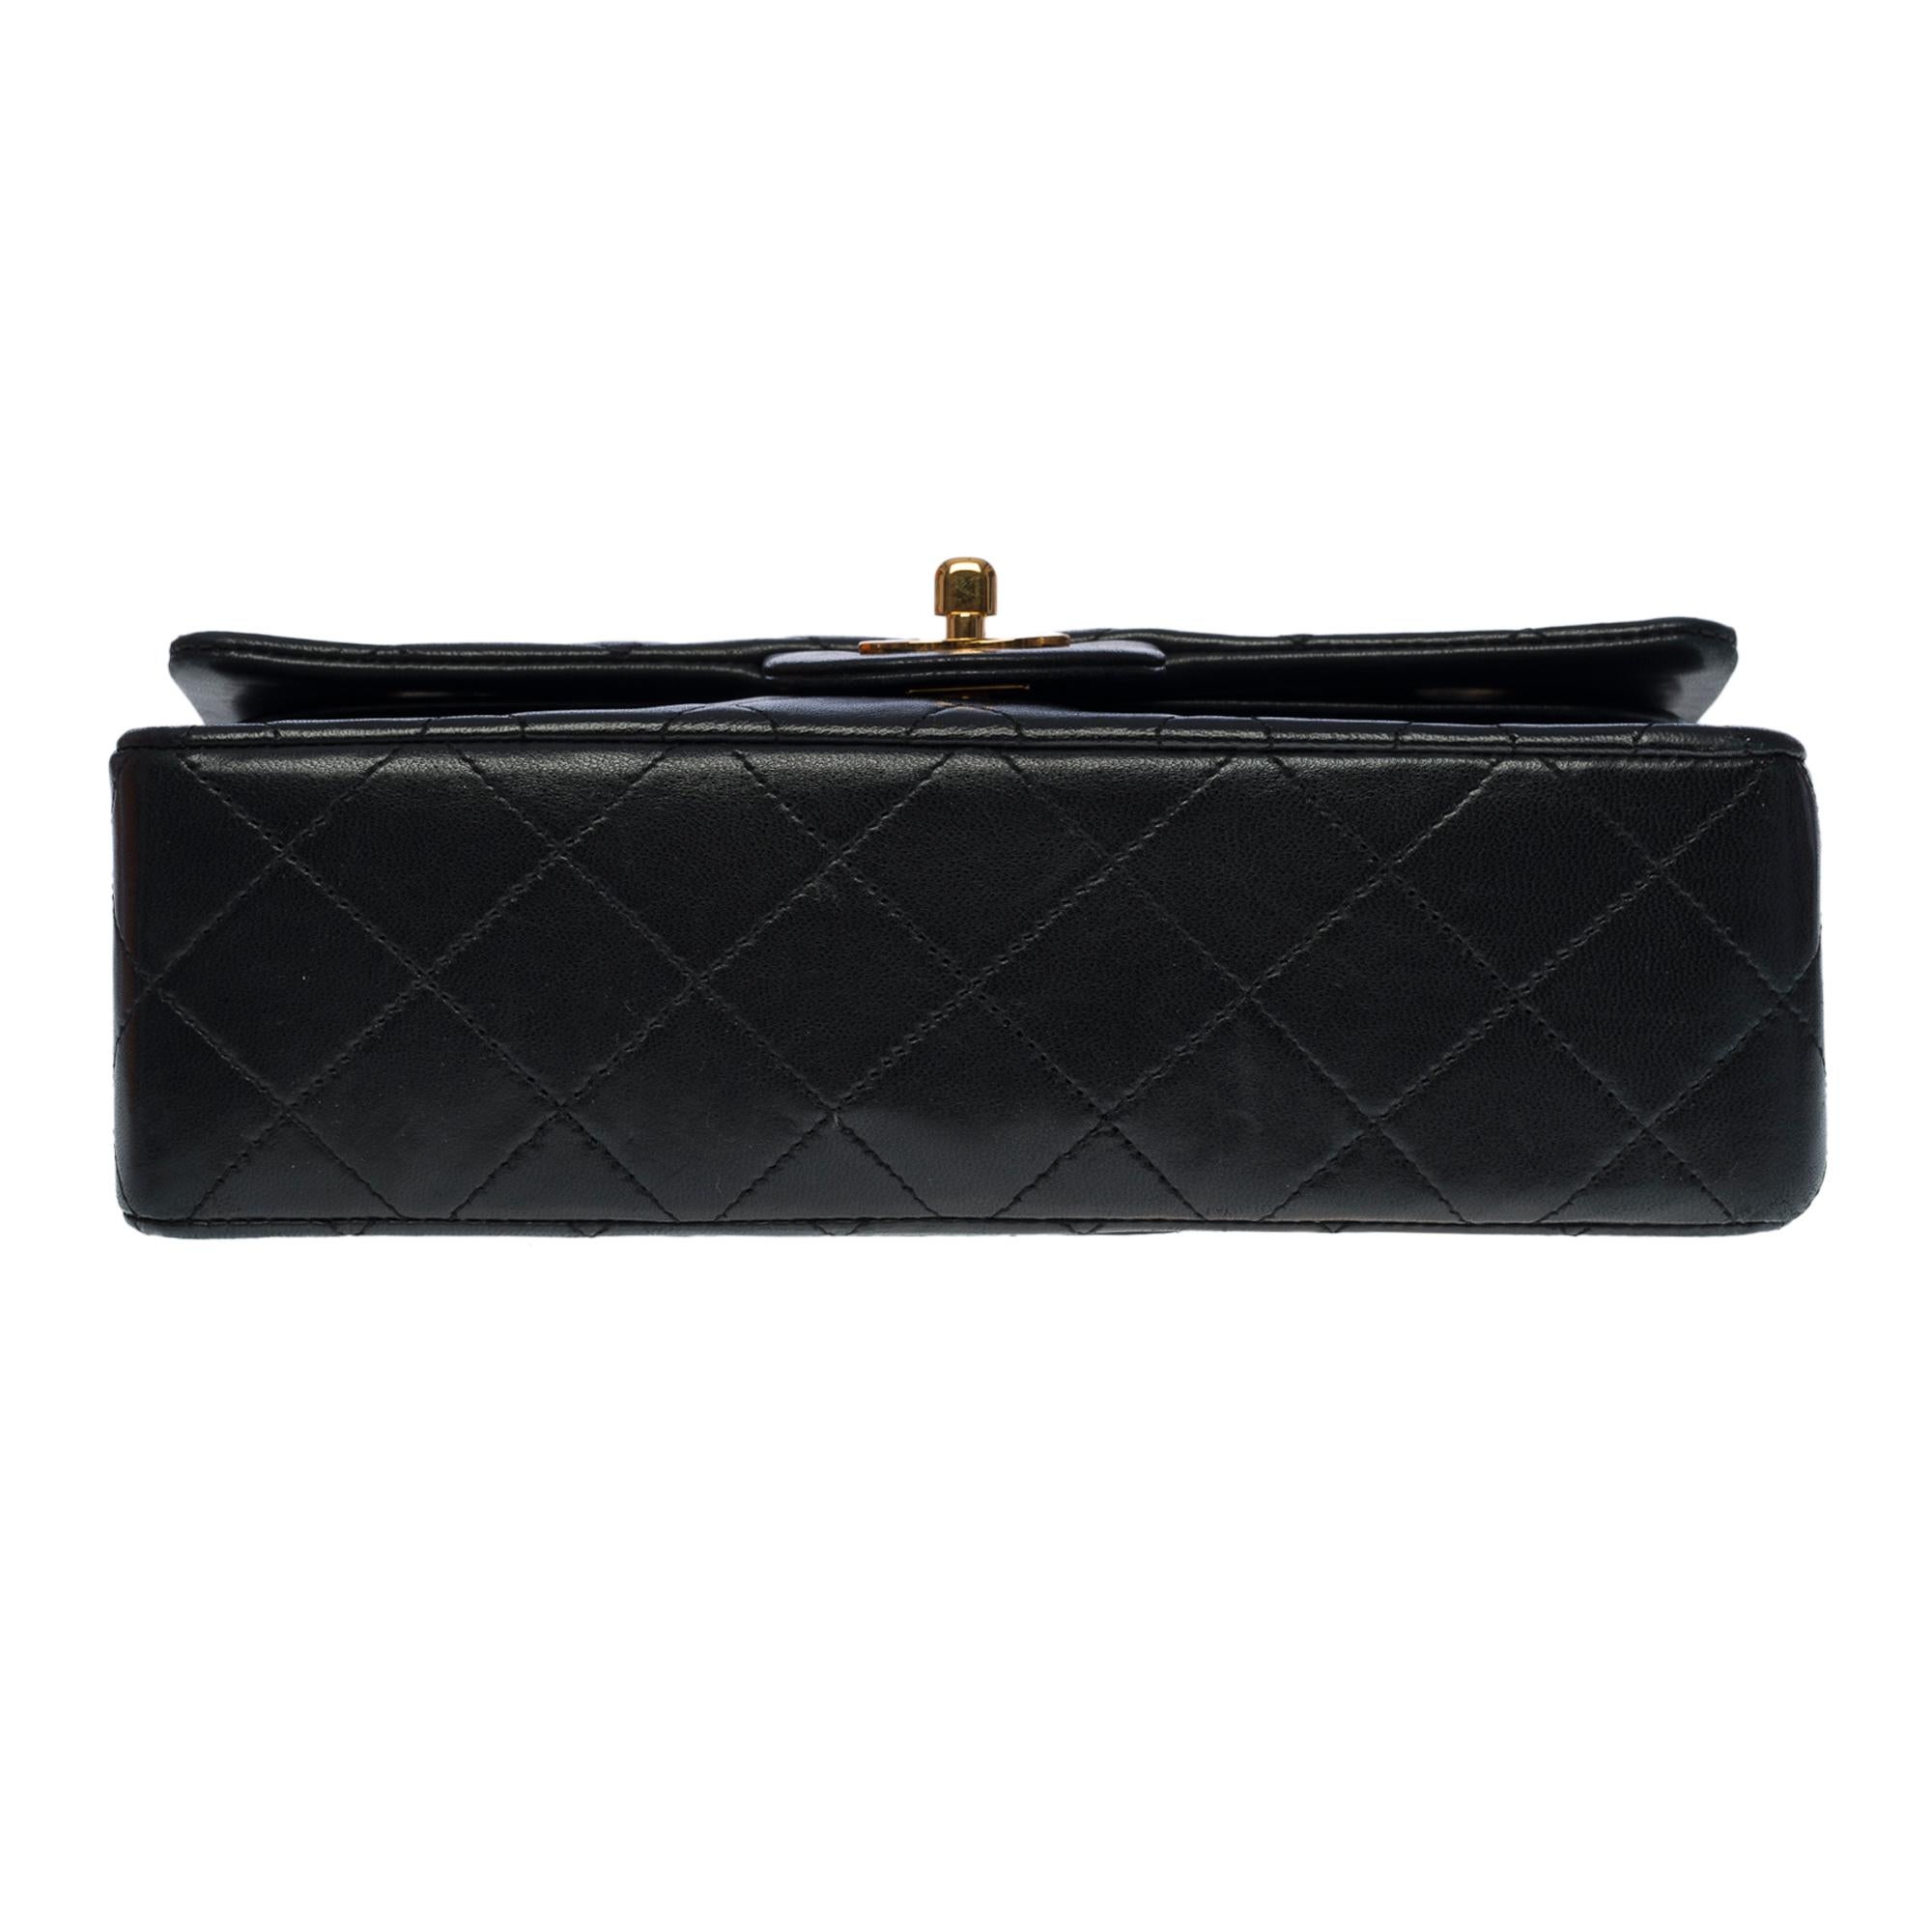 Chanel Timeless 23cm double flap shoulder bag in black quilted lambskin, GHW 5